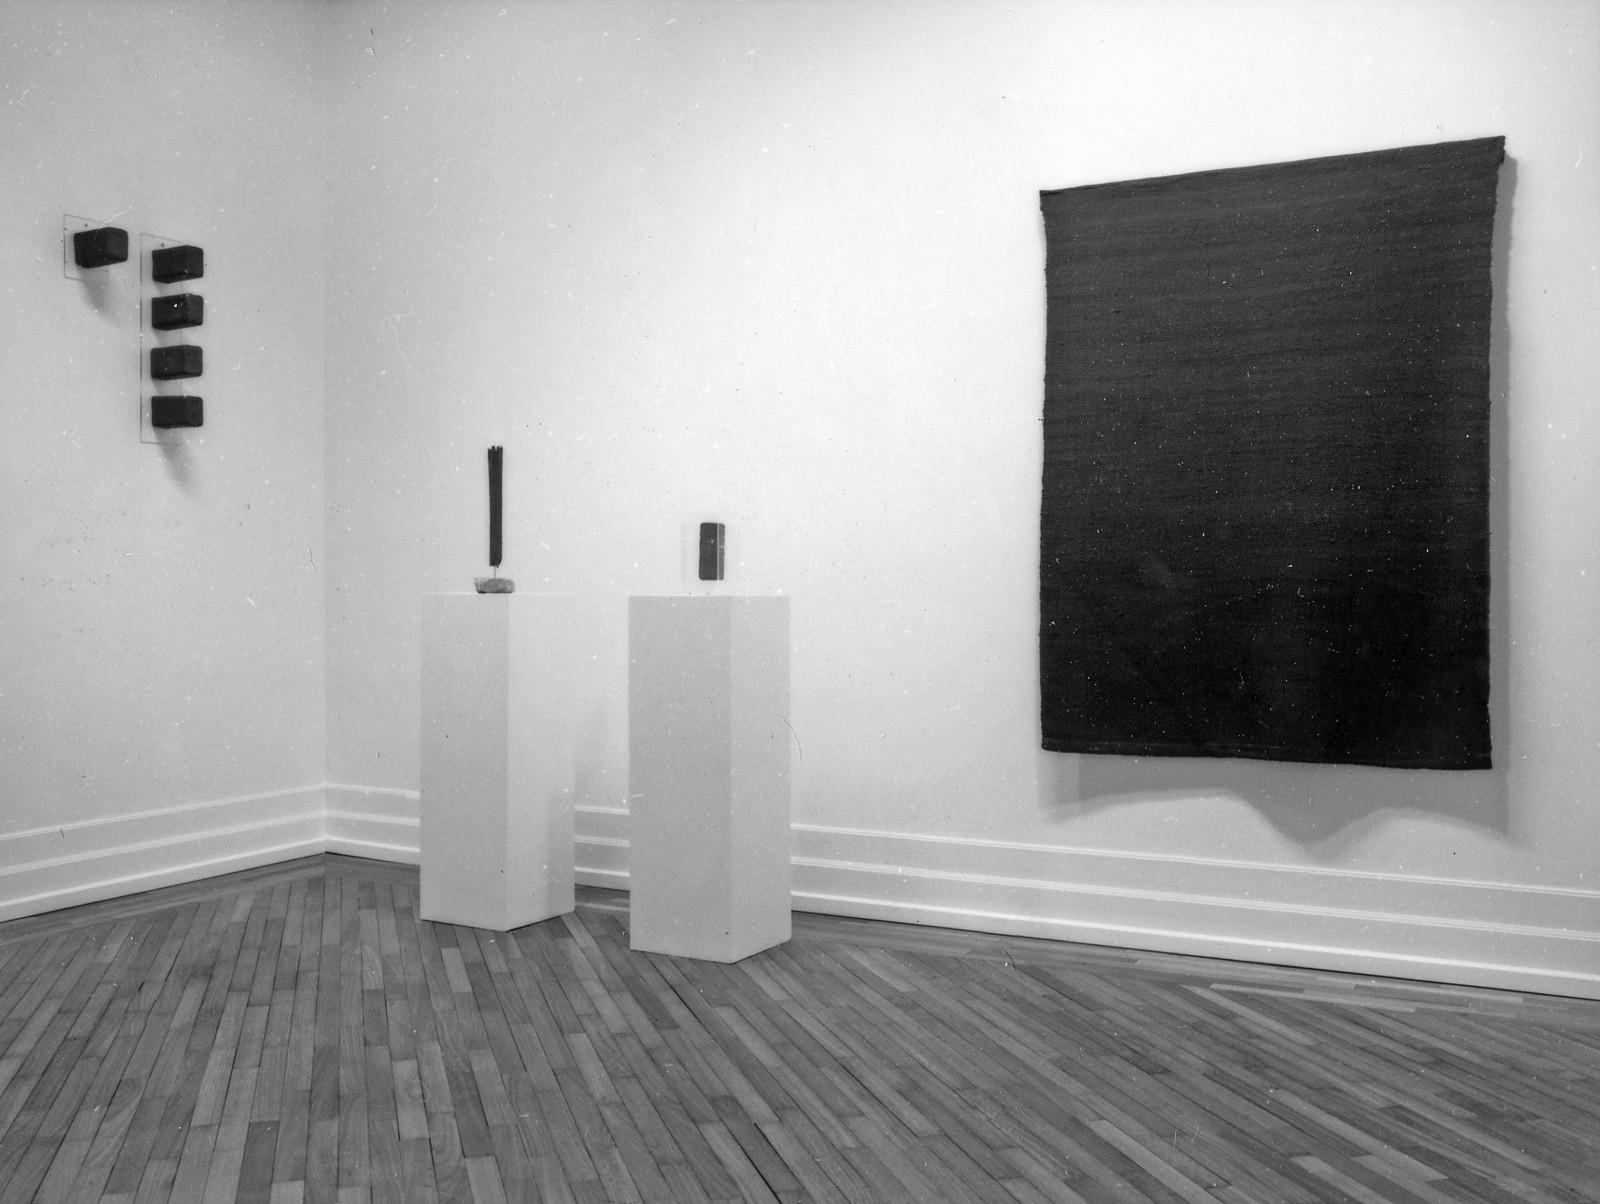 View of the exhibition "Yves Klein", Museet for Samtidskunst, 1997